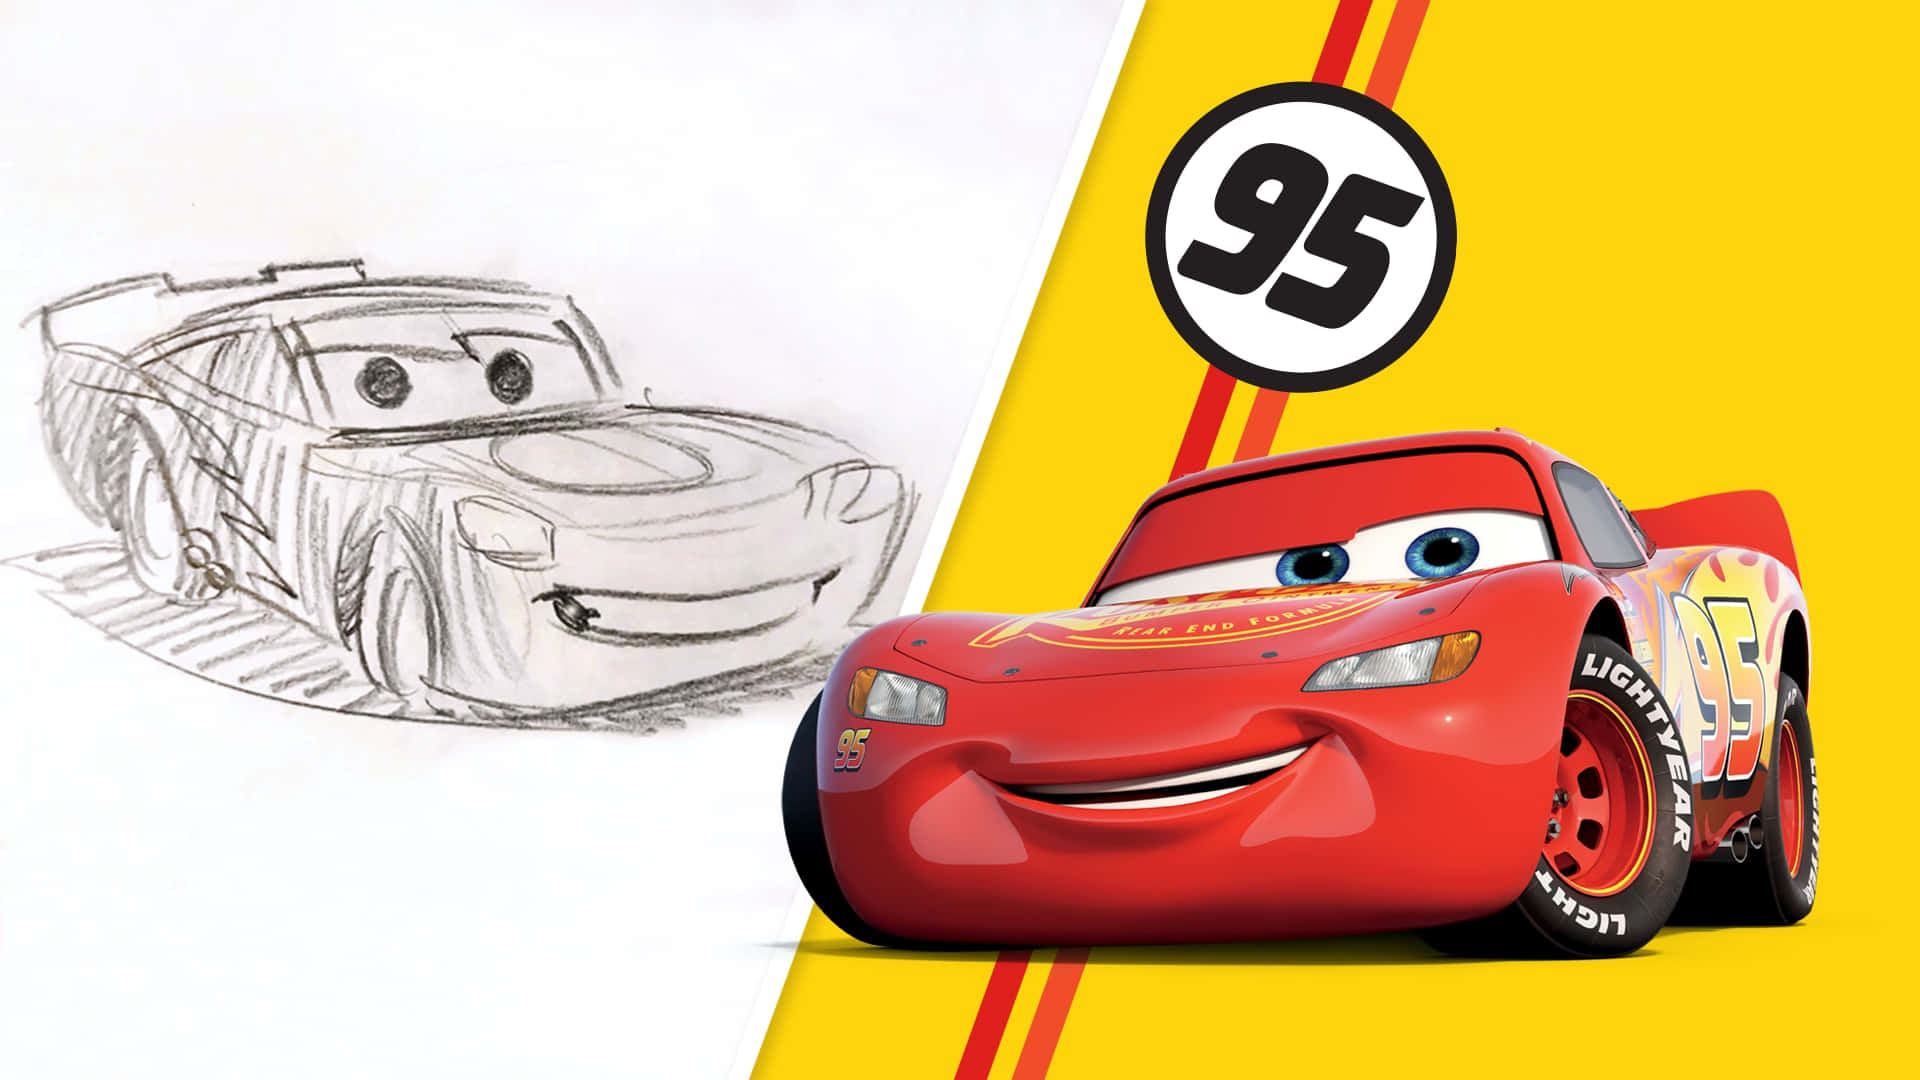 Lightning McQueen Racing on the Fast Track